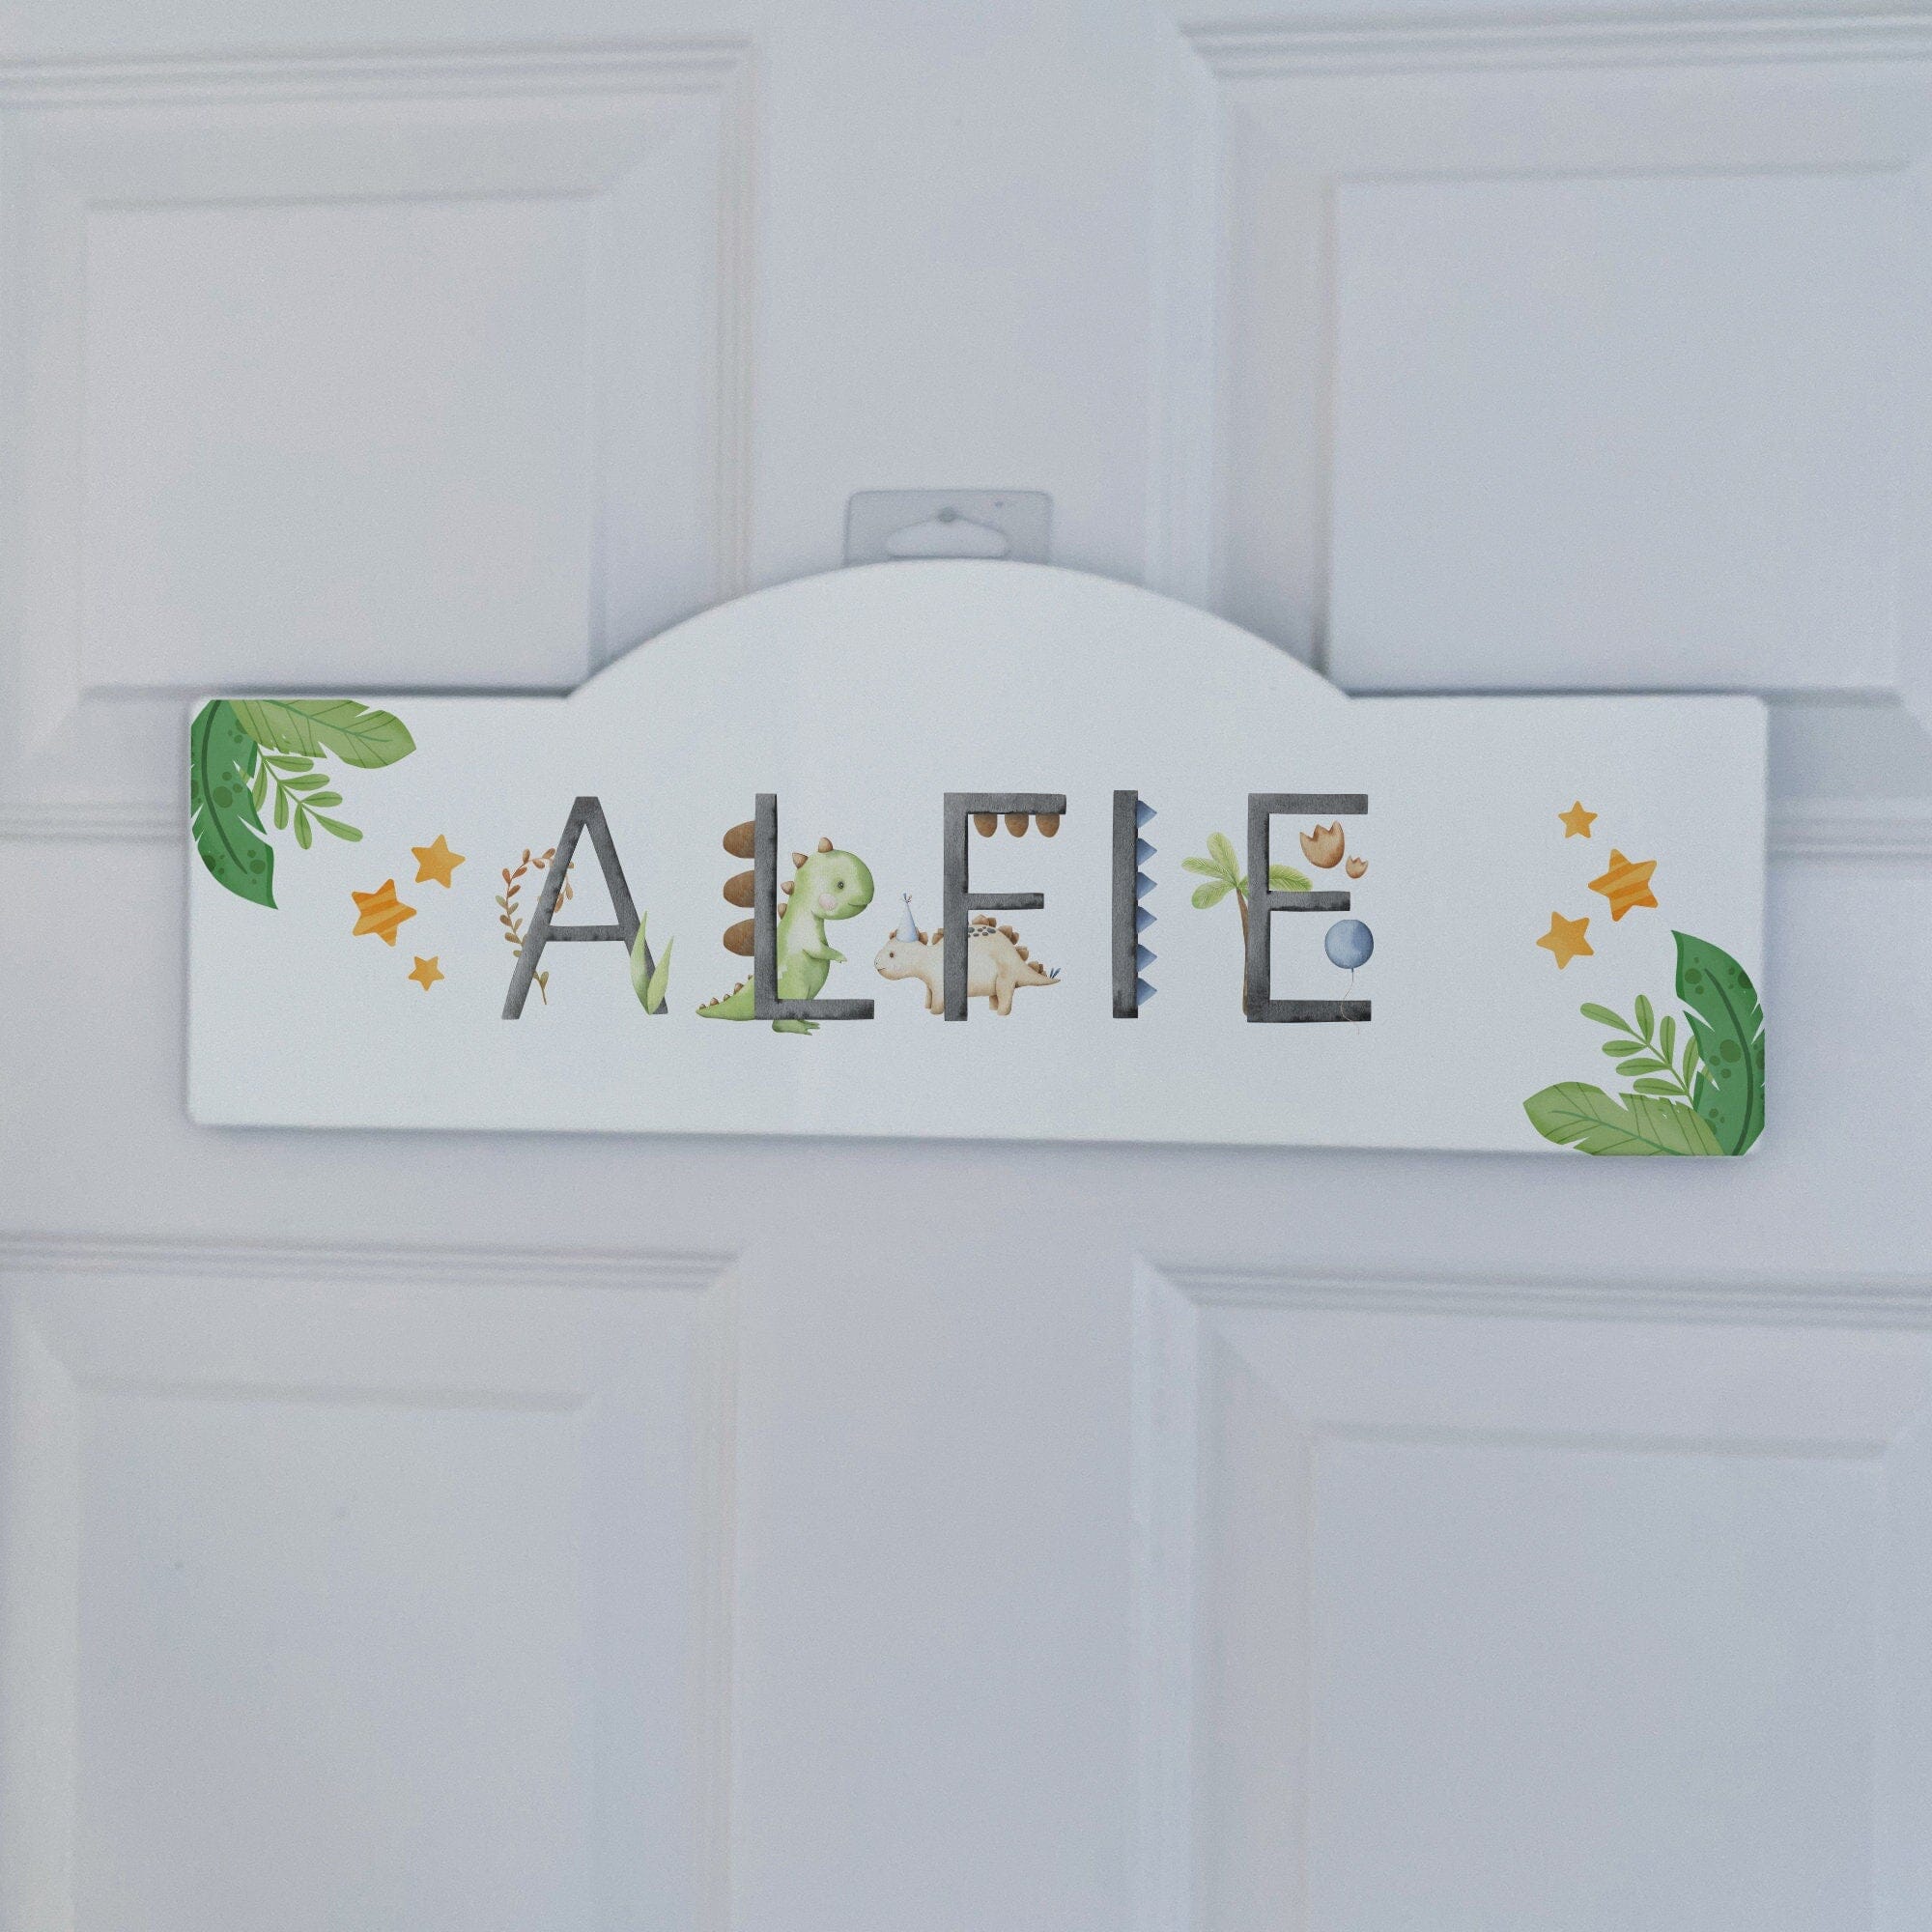 Personalised Room Sign With Childs Name, Dinosaur Jungle Safari Themed, New Baby Room Decor Plaque, Toddler Nursery